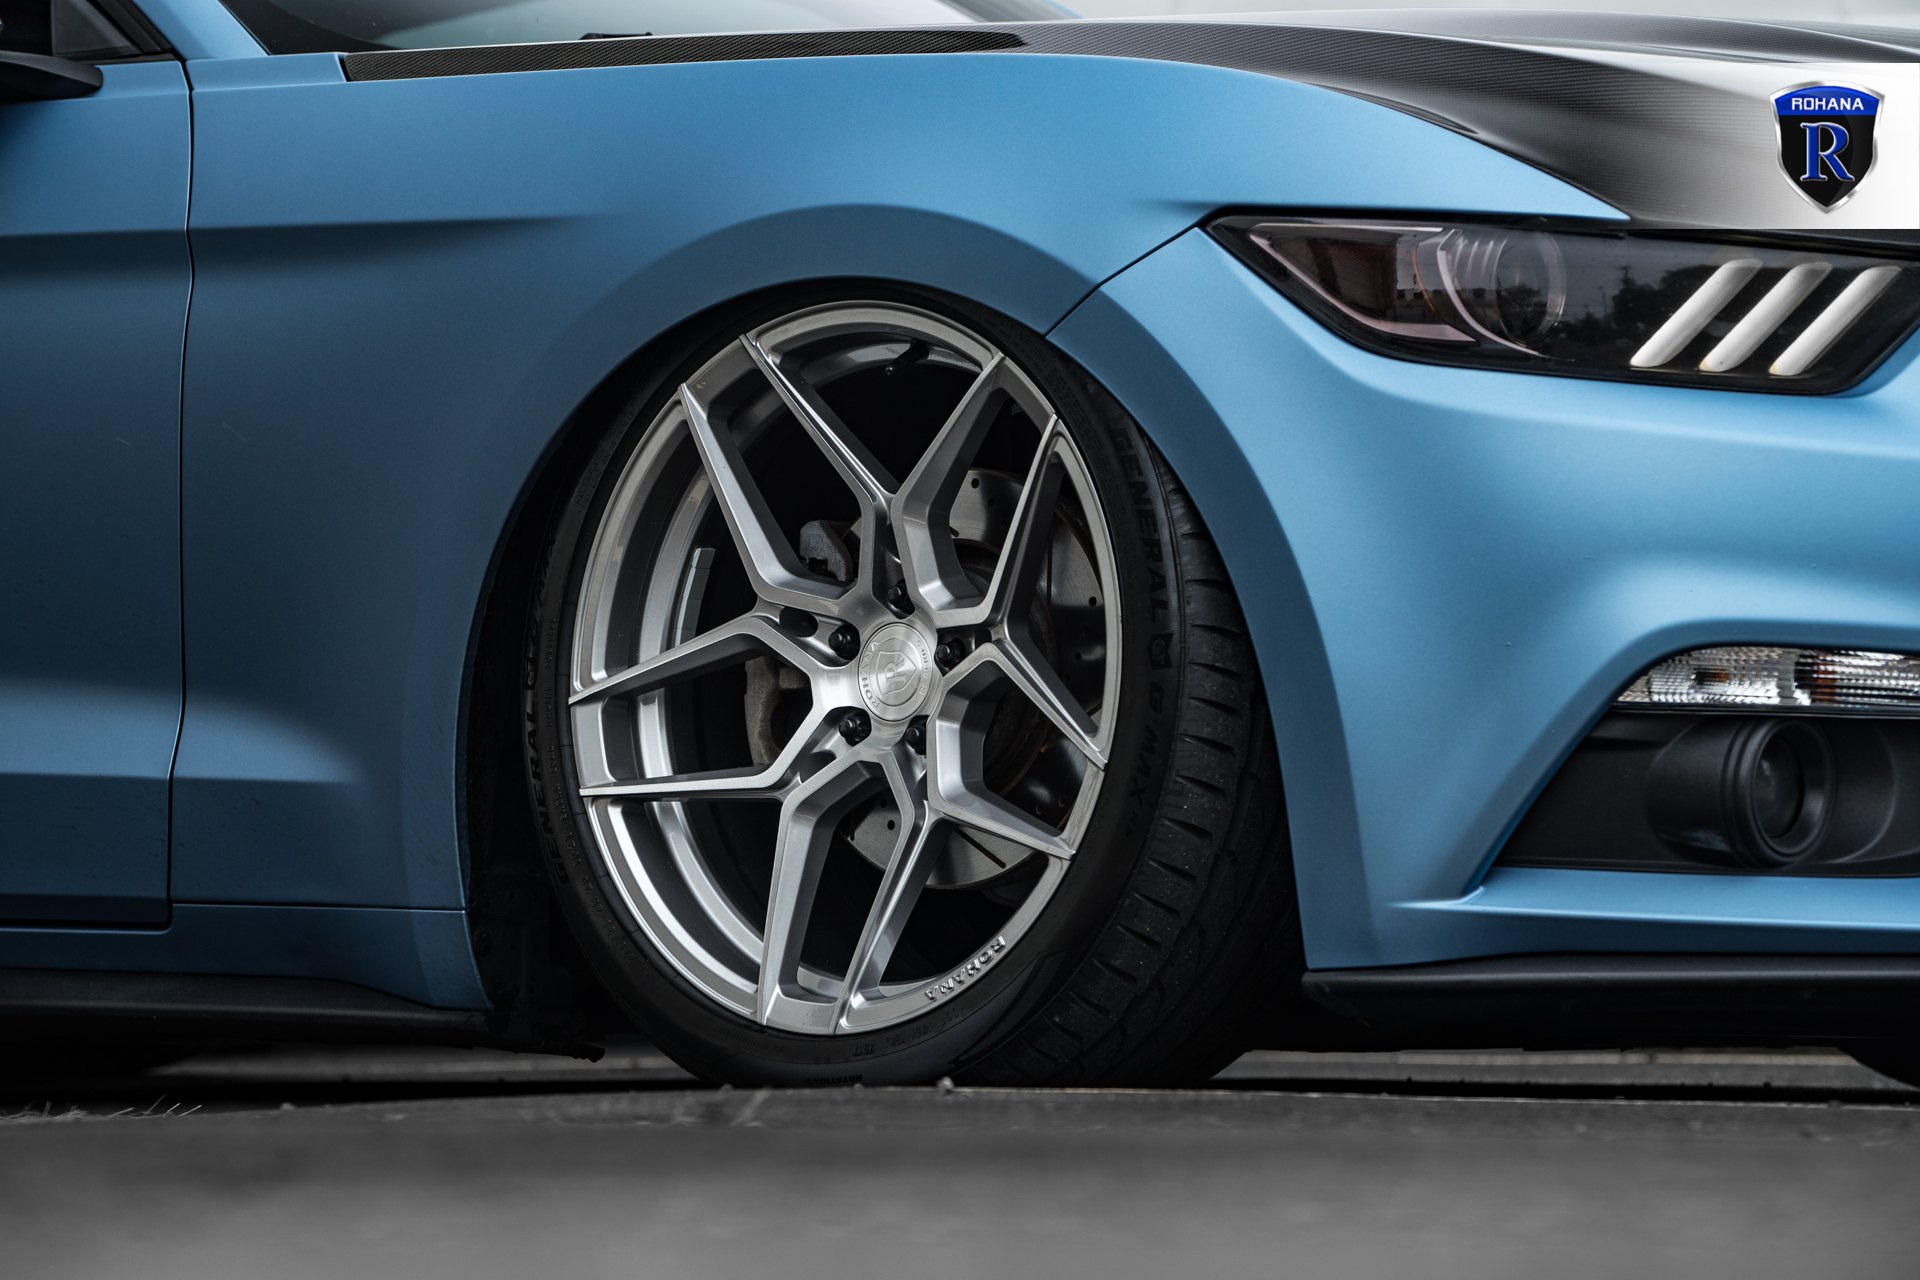 General Tires on Custom Blue Ford Mustang - Photo by Rohana Wheels